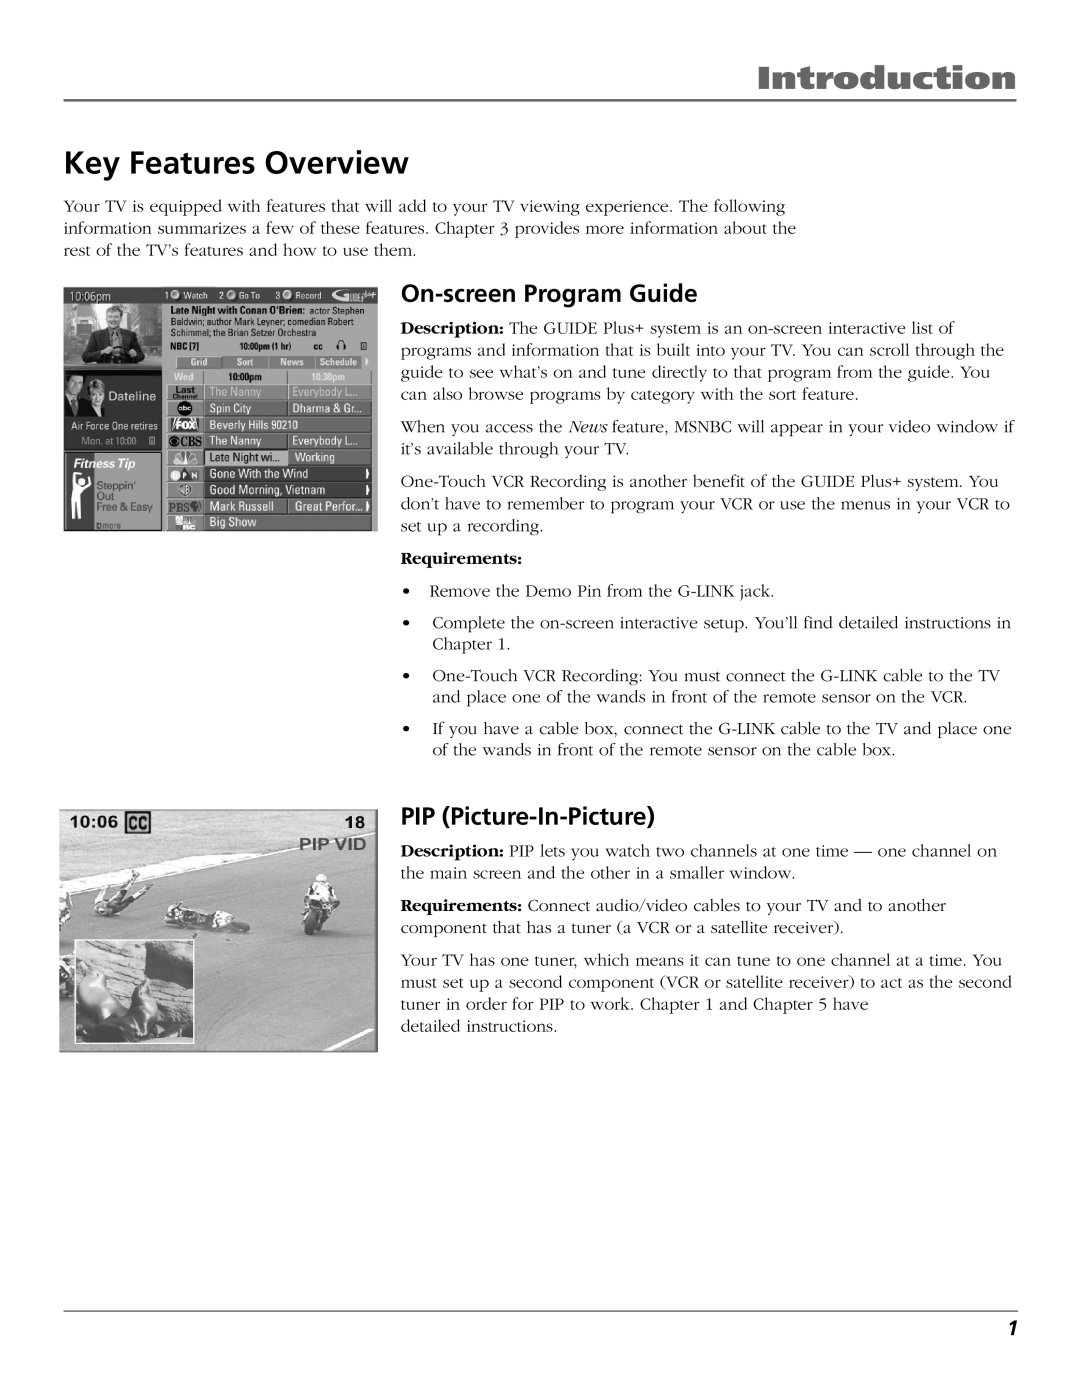 RCA F27669 manual Introduction, Key Features Overview, On-screen Program Guide, PIP Picture-In-Picture, Requirements 